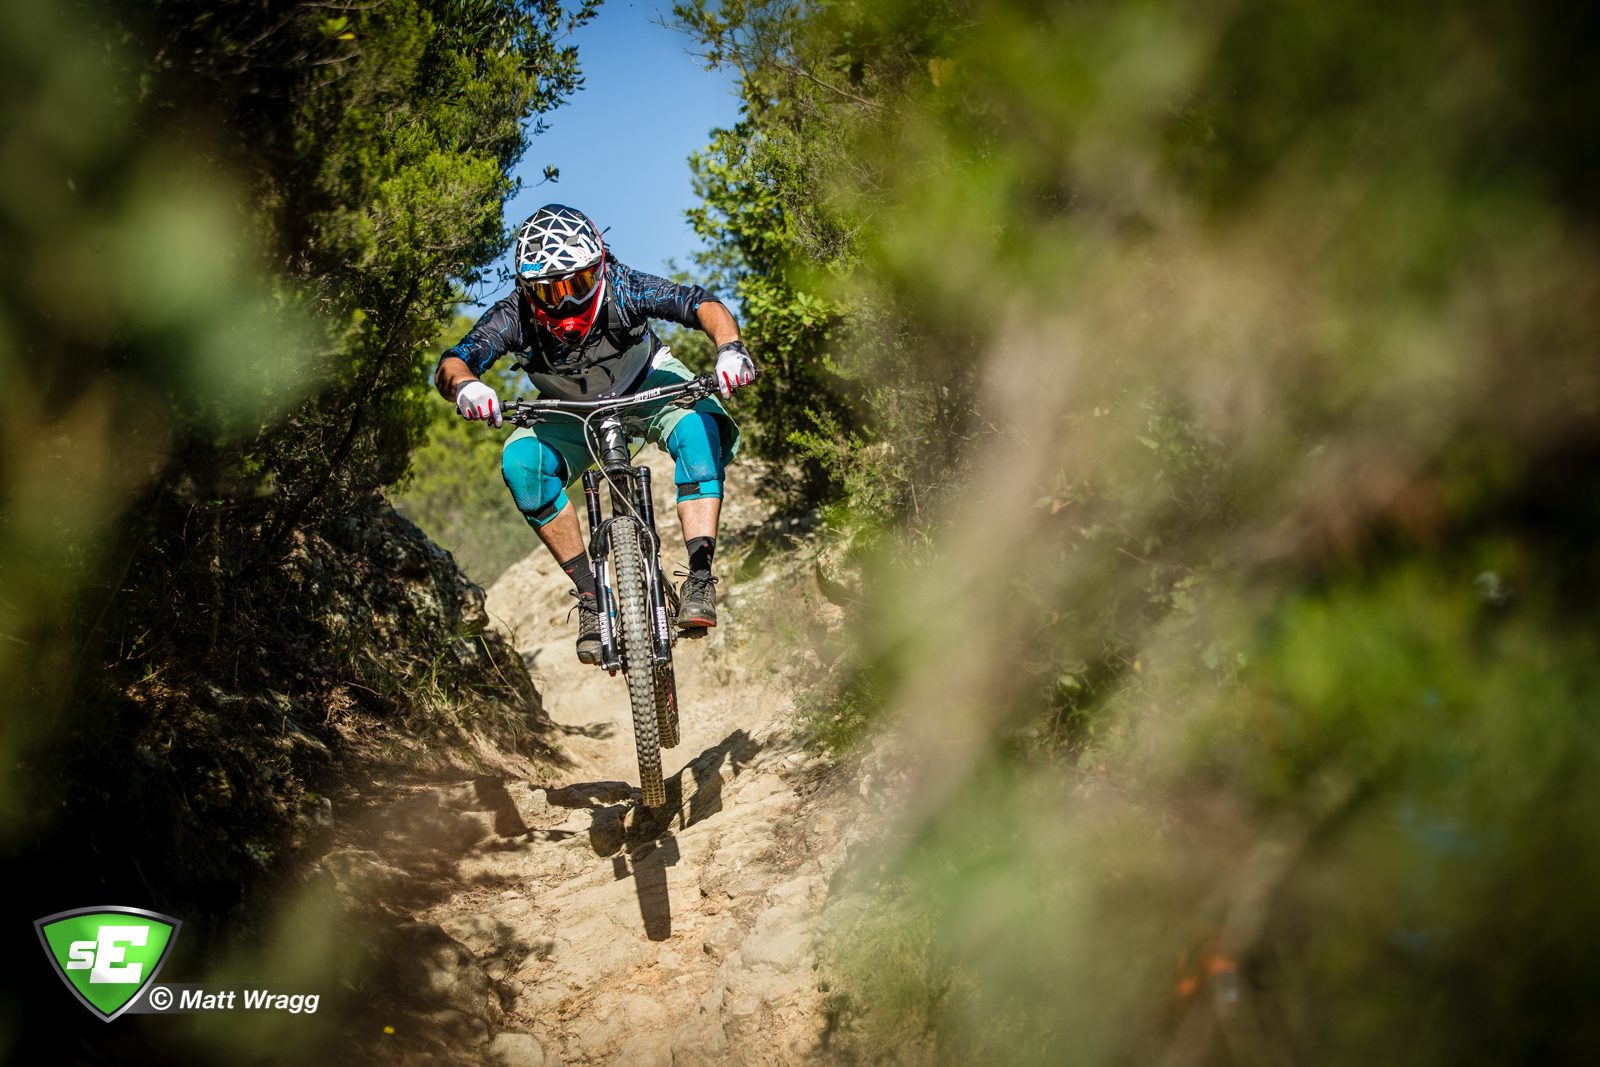 Nacho on stage two in practice. EWS 7 2014, Finale Ligure. Photo by Matt Wragg